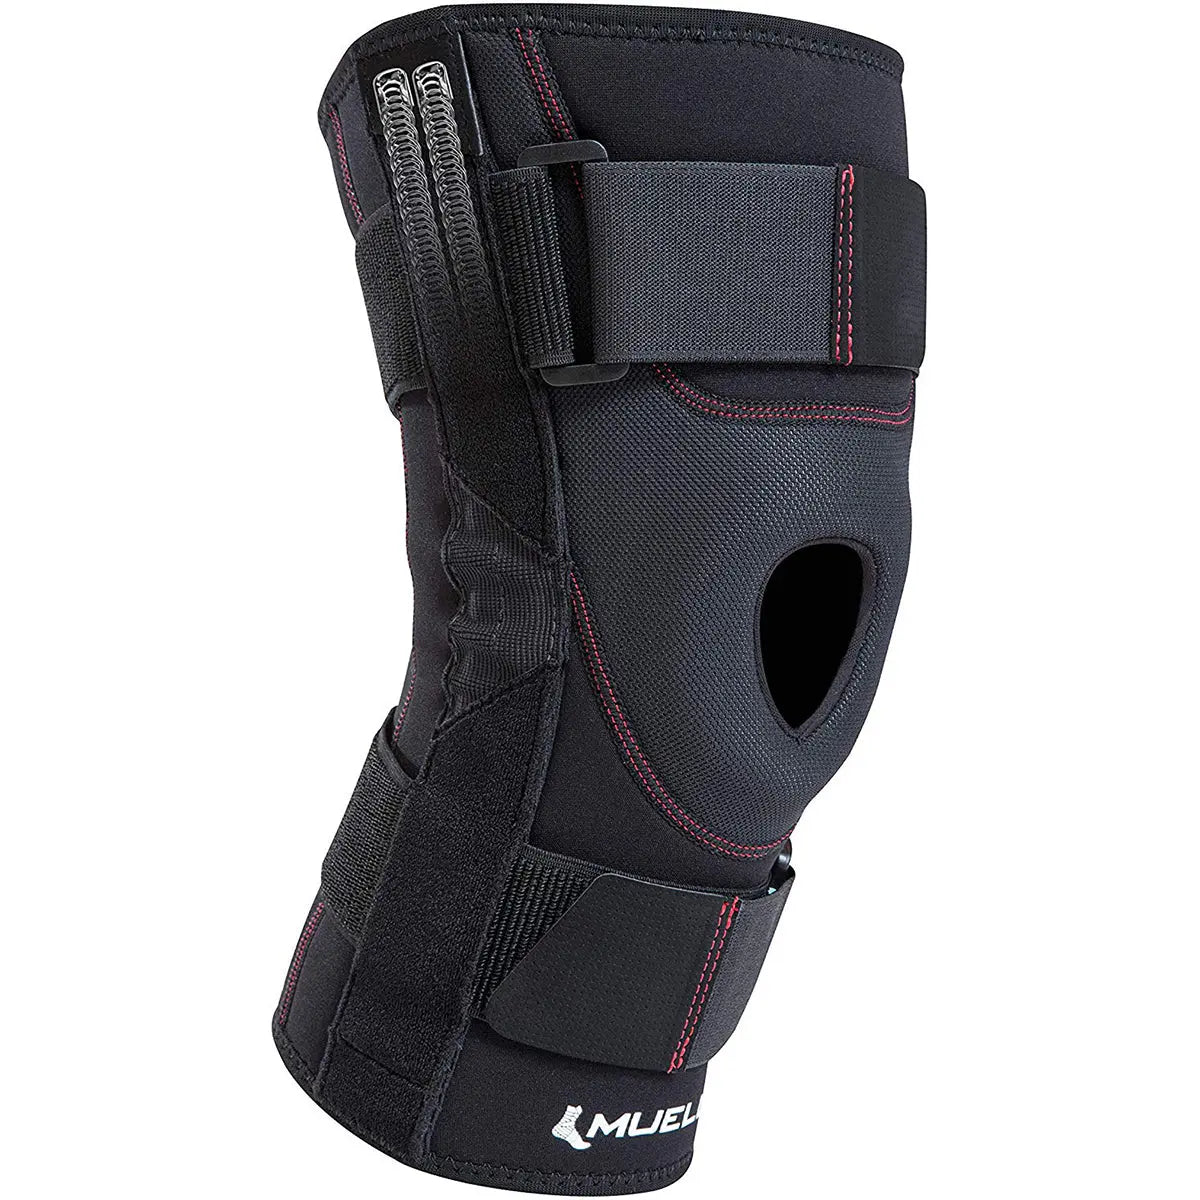 Mueller - Hinged Wraparound Knee Brace - Support and stability